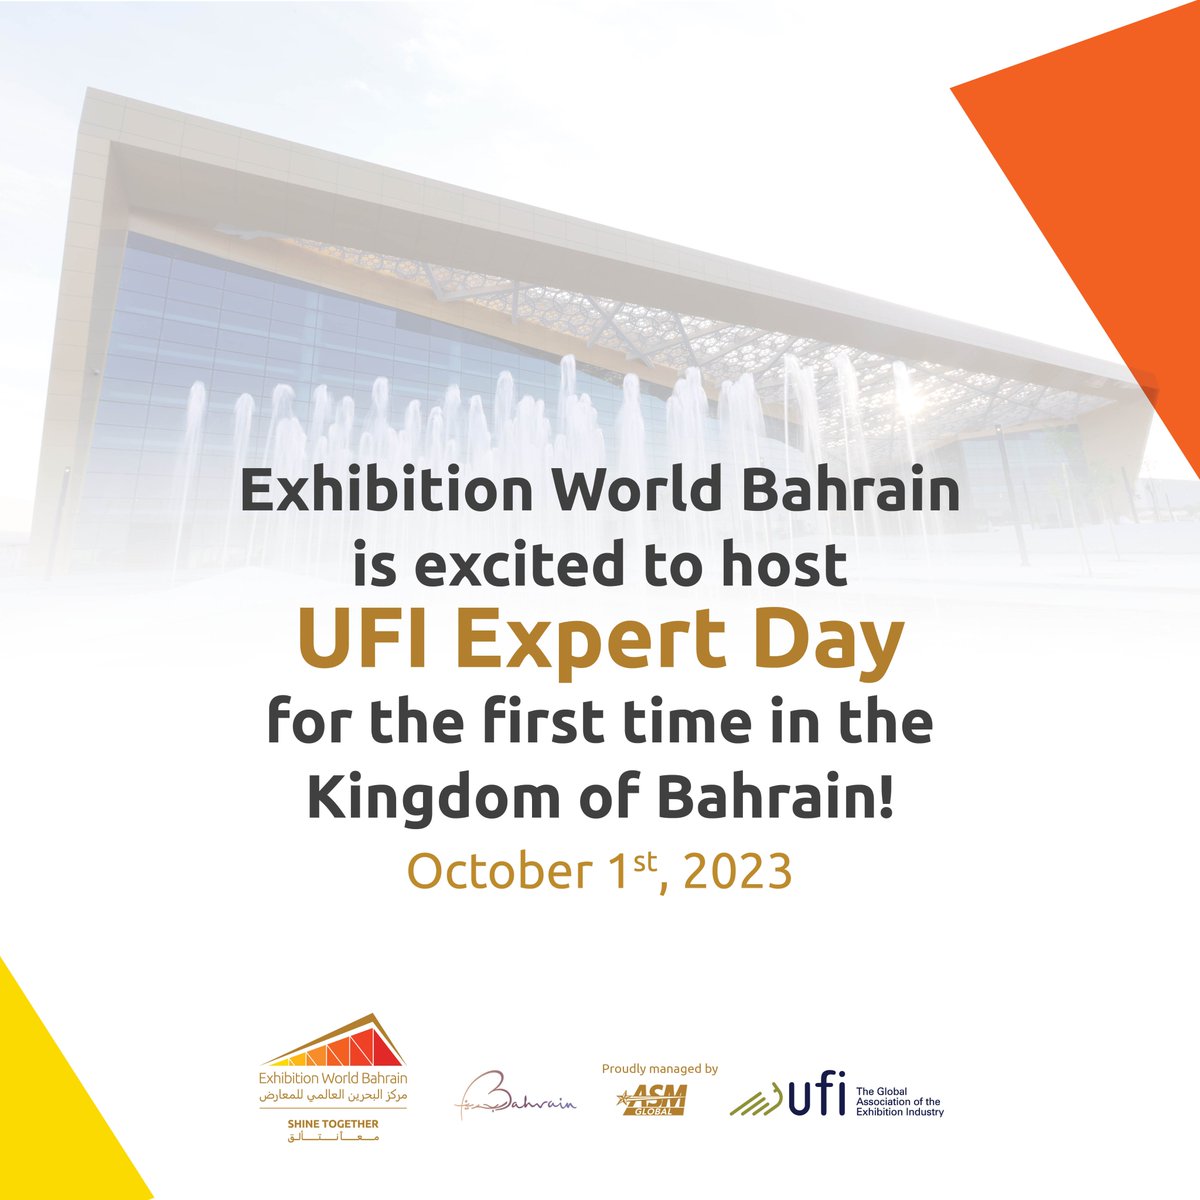 Exhibition World Bahrain is excited to announce that we will be hosting UFI Expert Day on the 1st of October, featuring experts discussing the region's MICE industry and its economic impact on the Kingdom.

#MICEevents #MICEindustry #UFI #UFIExpertDay